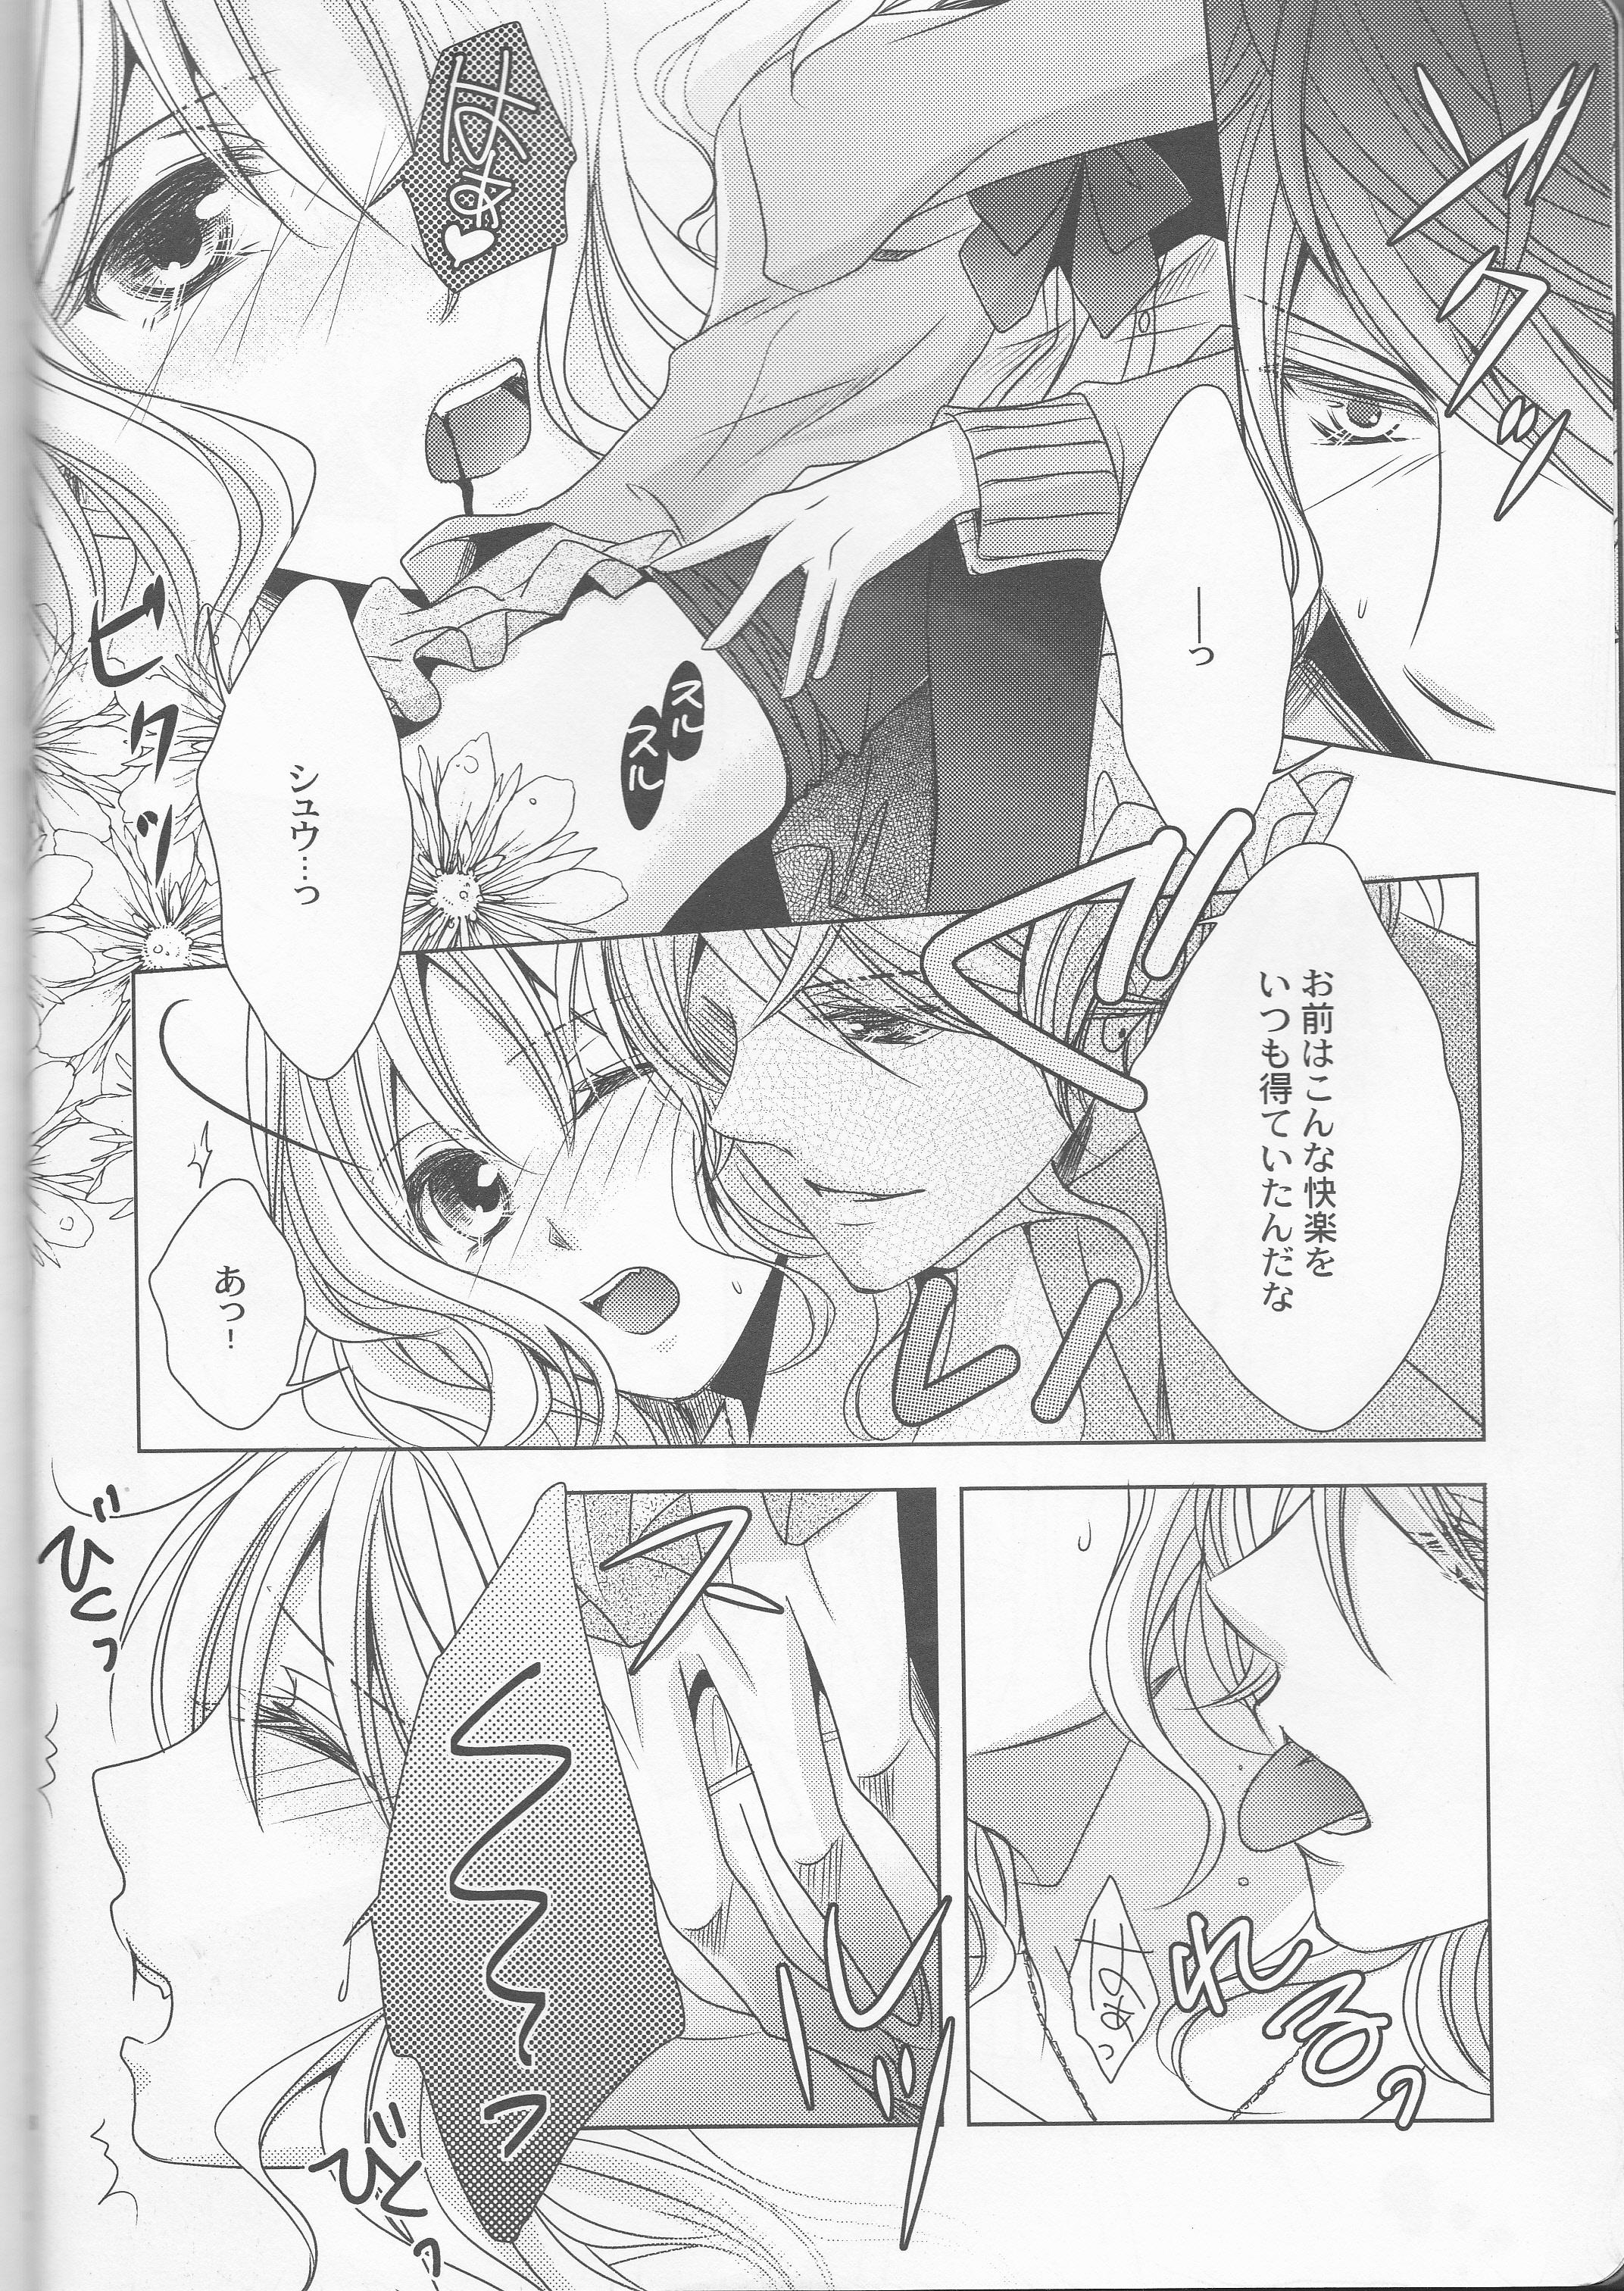 Penetration How to Blood - Diabolik lovers Muscle - Page 8